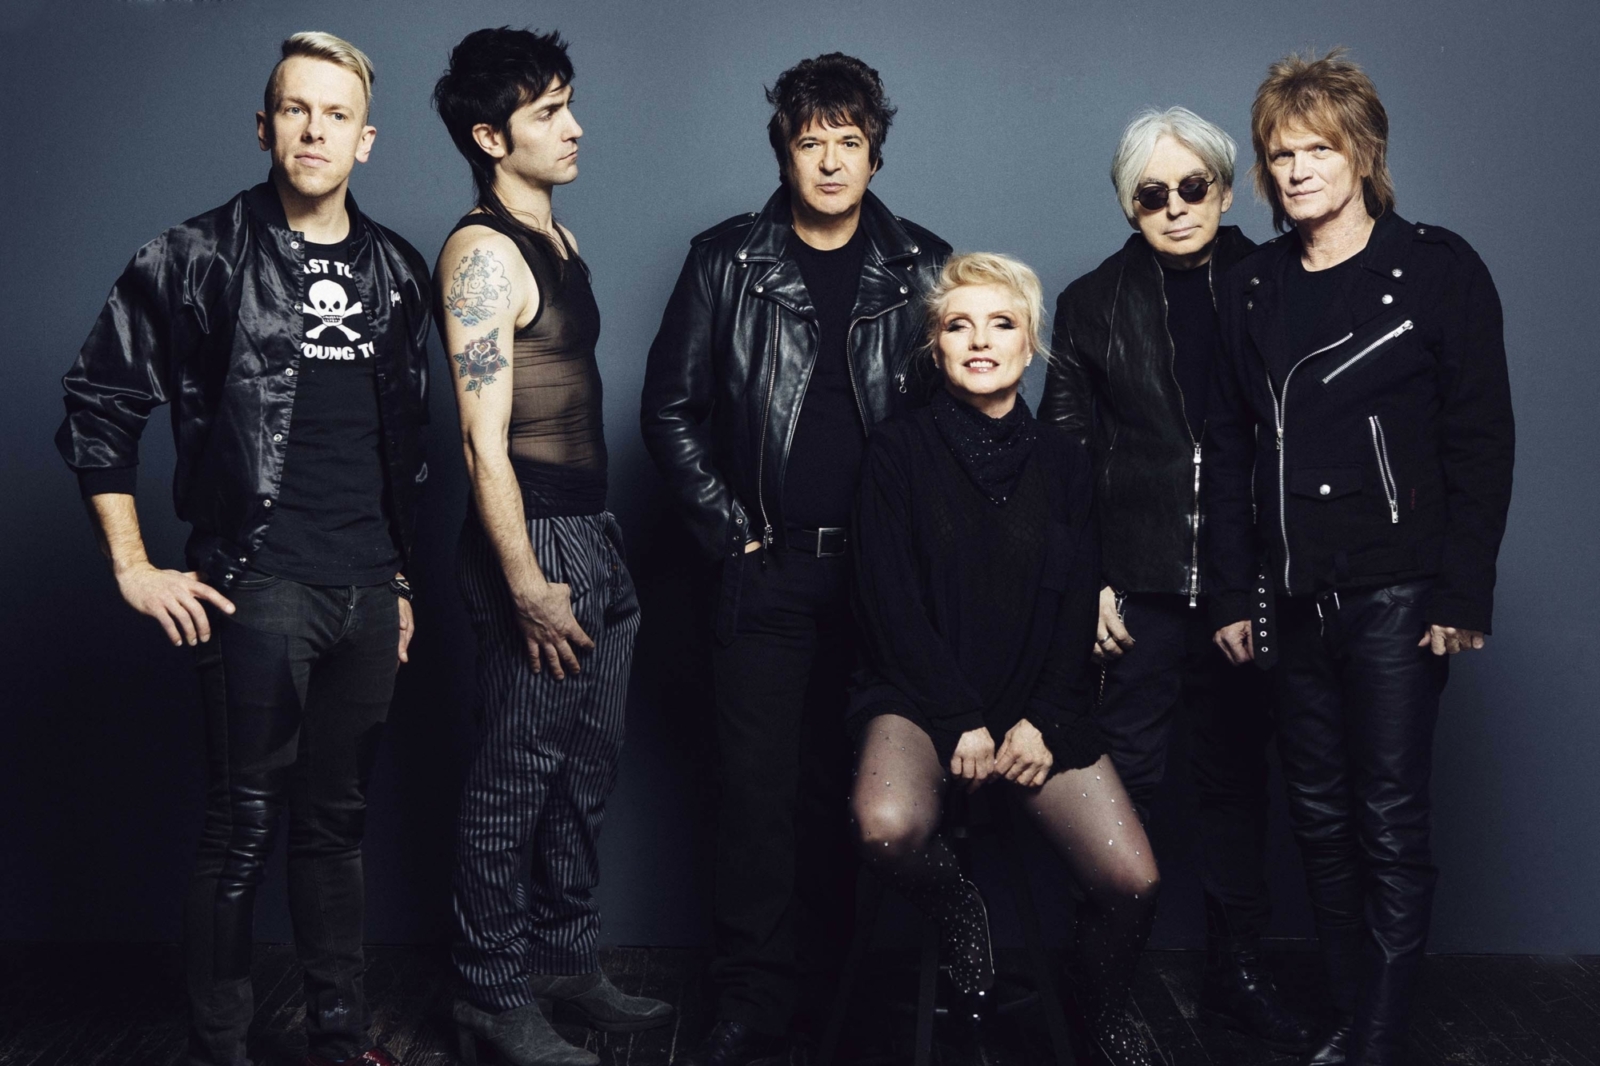 Blondie and Garbage team up for ‘Against the Odds’ tour